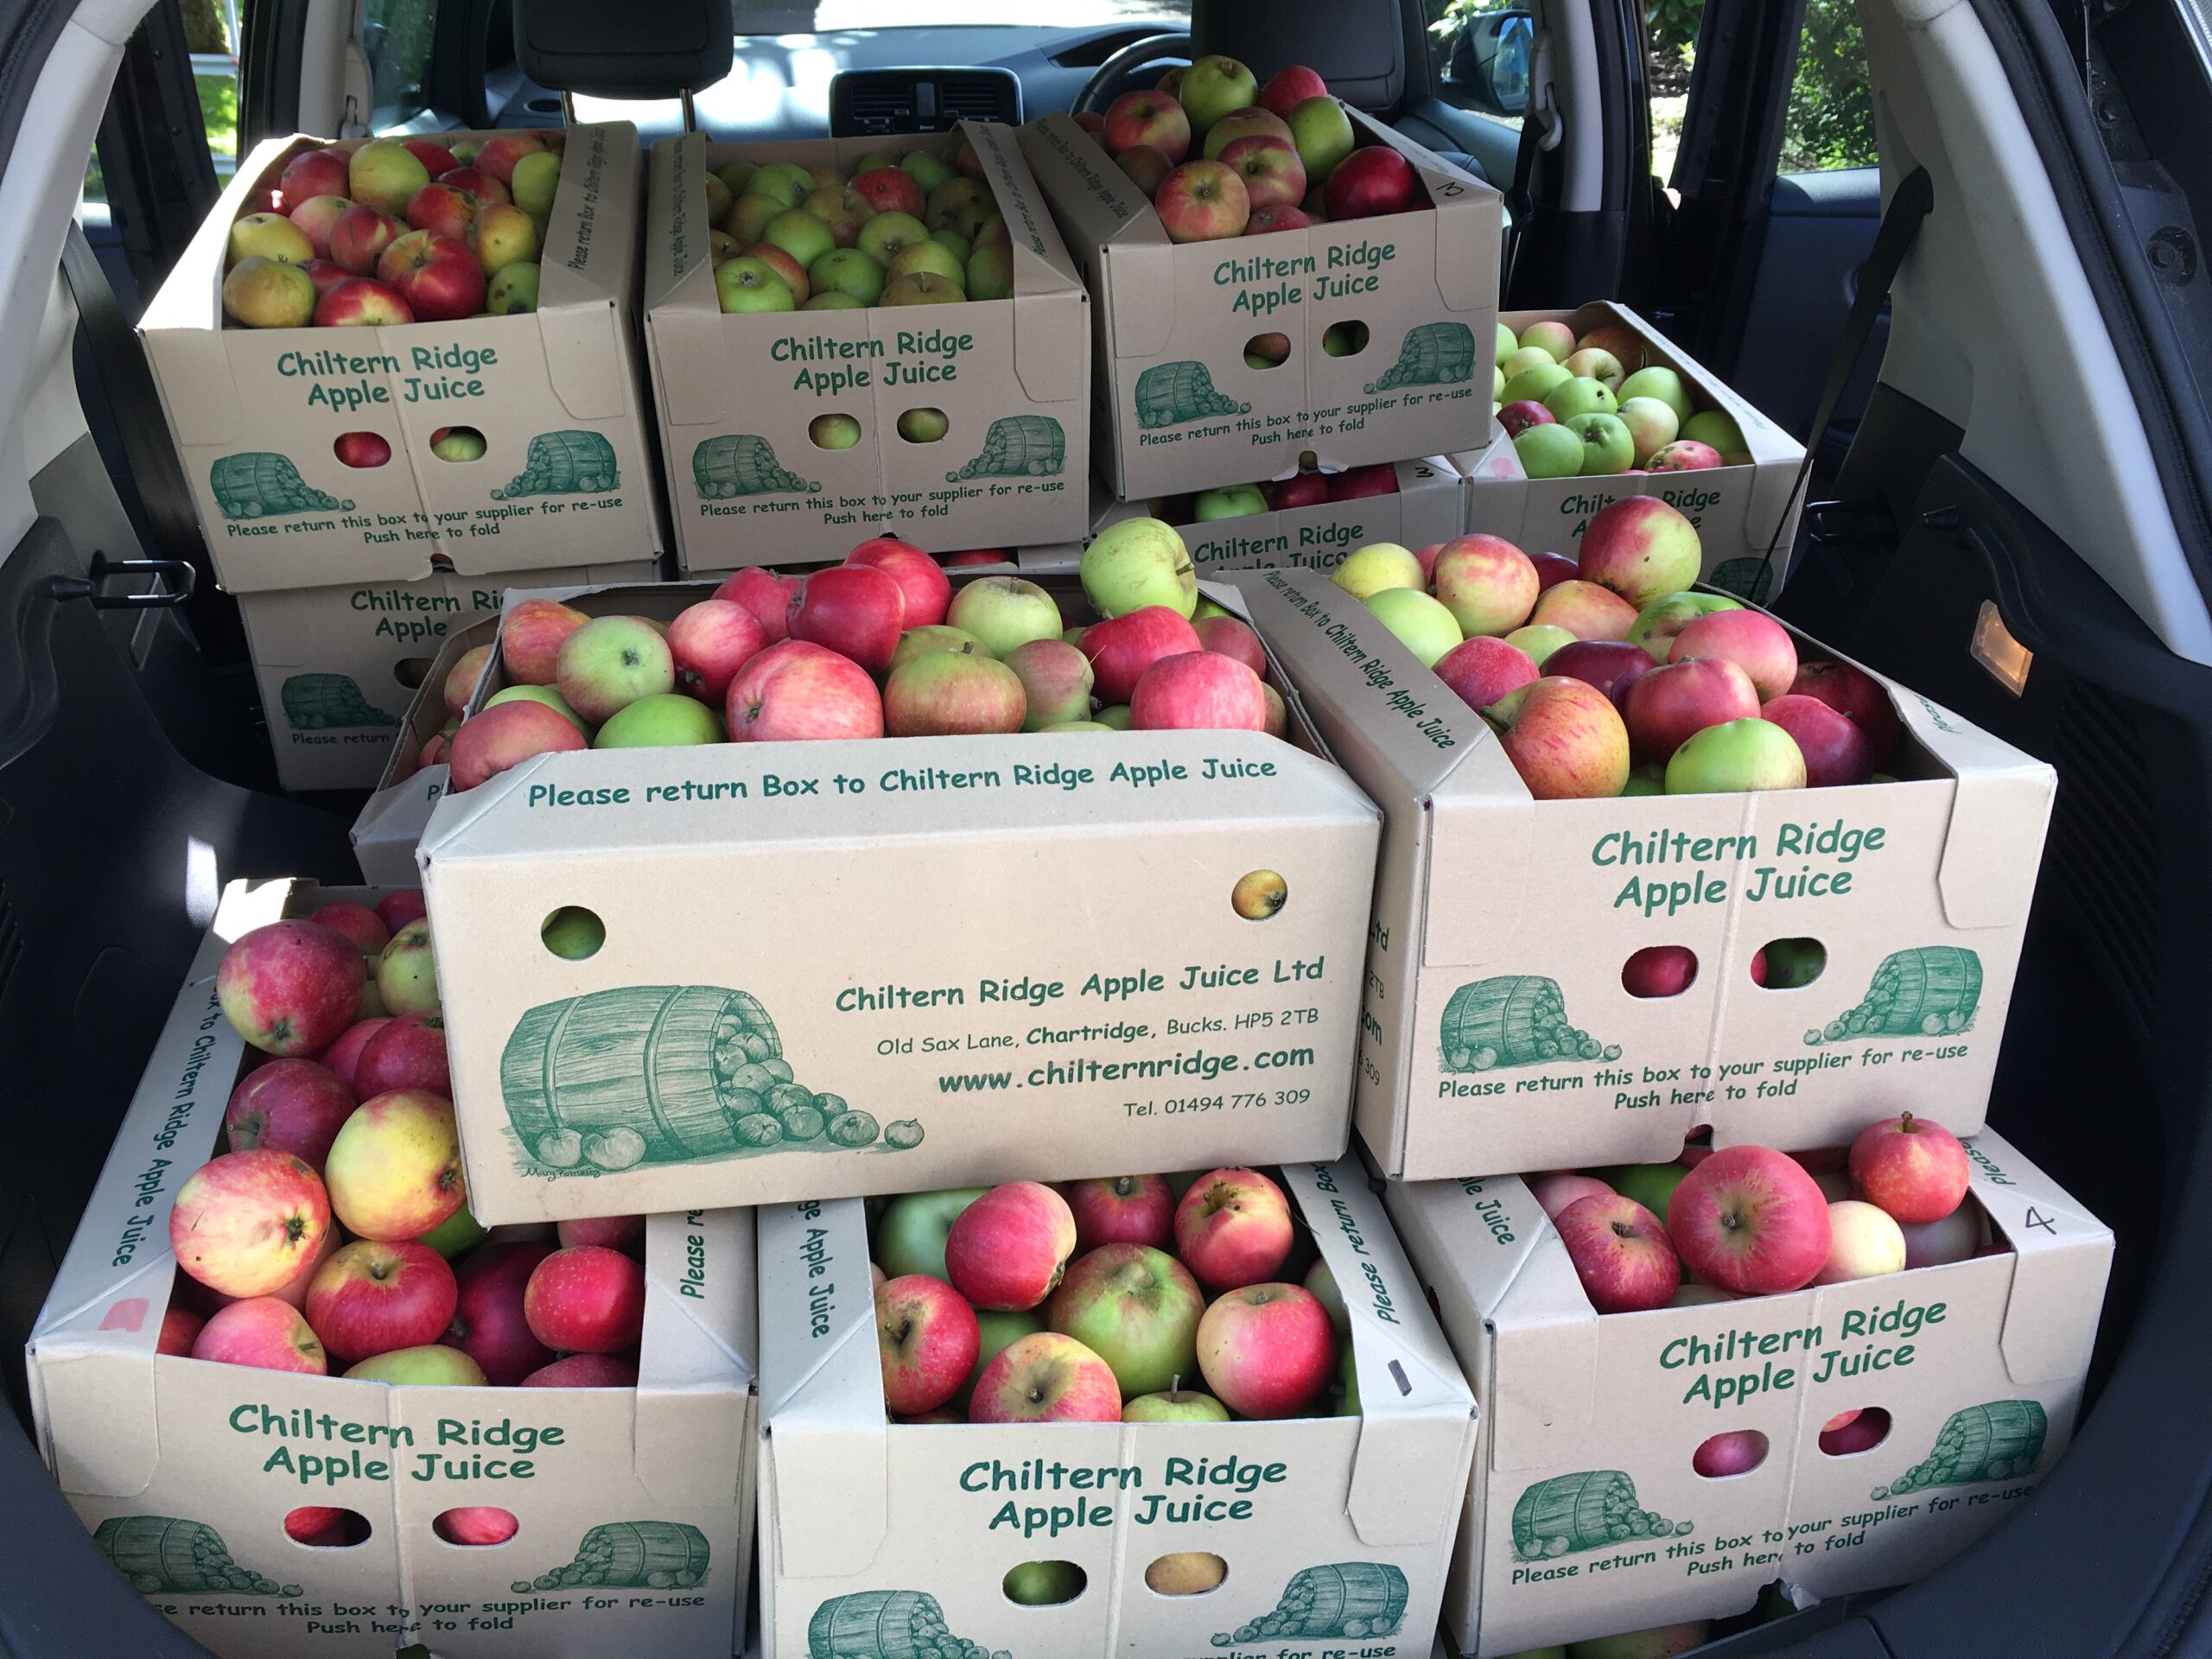 boxes full of apples in a car boot